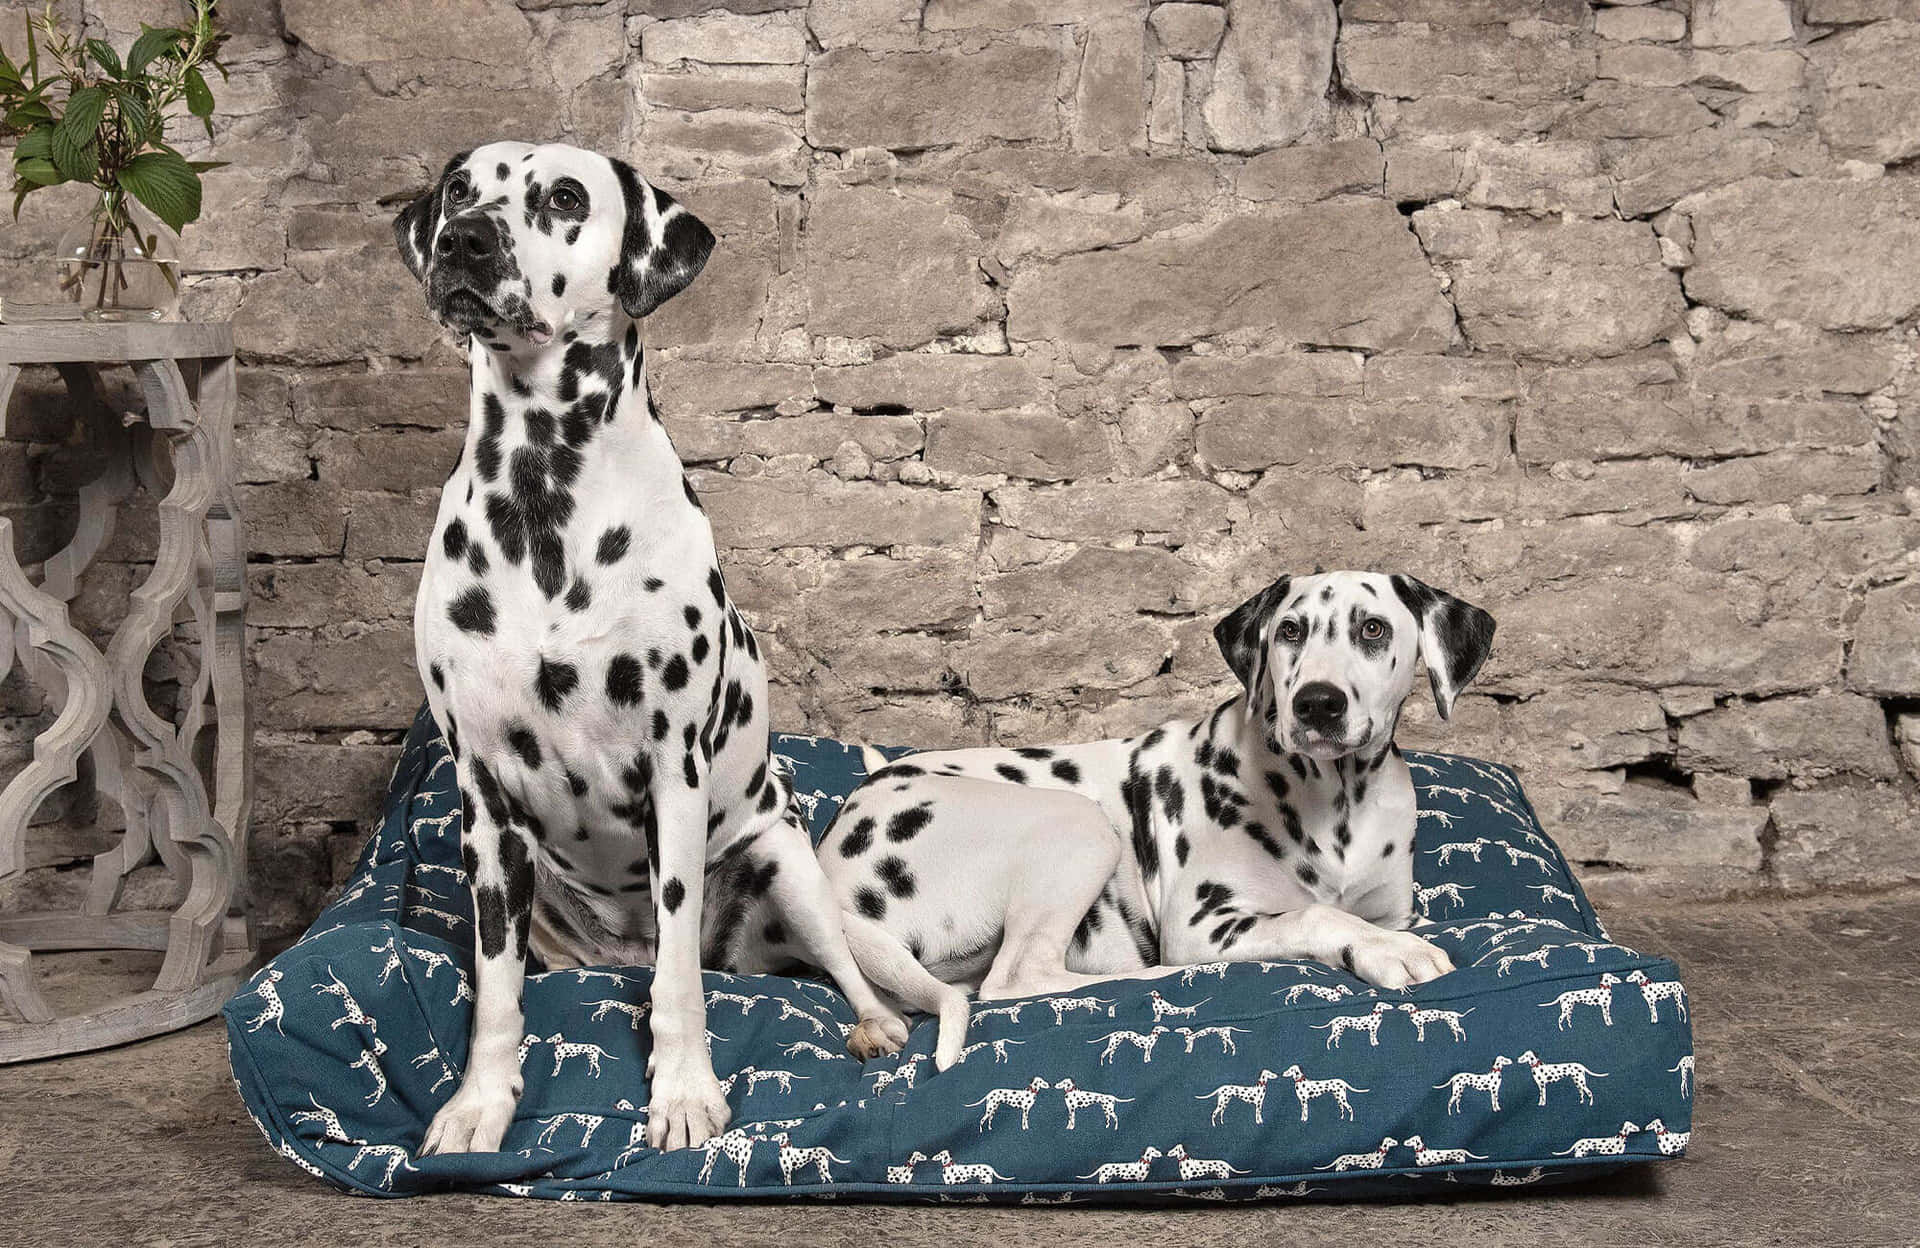 A beautiful black and white spotted Dalmatian looking for a home